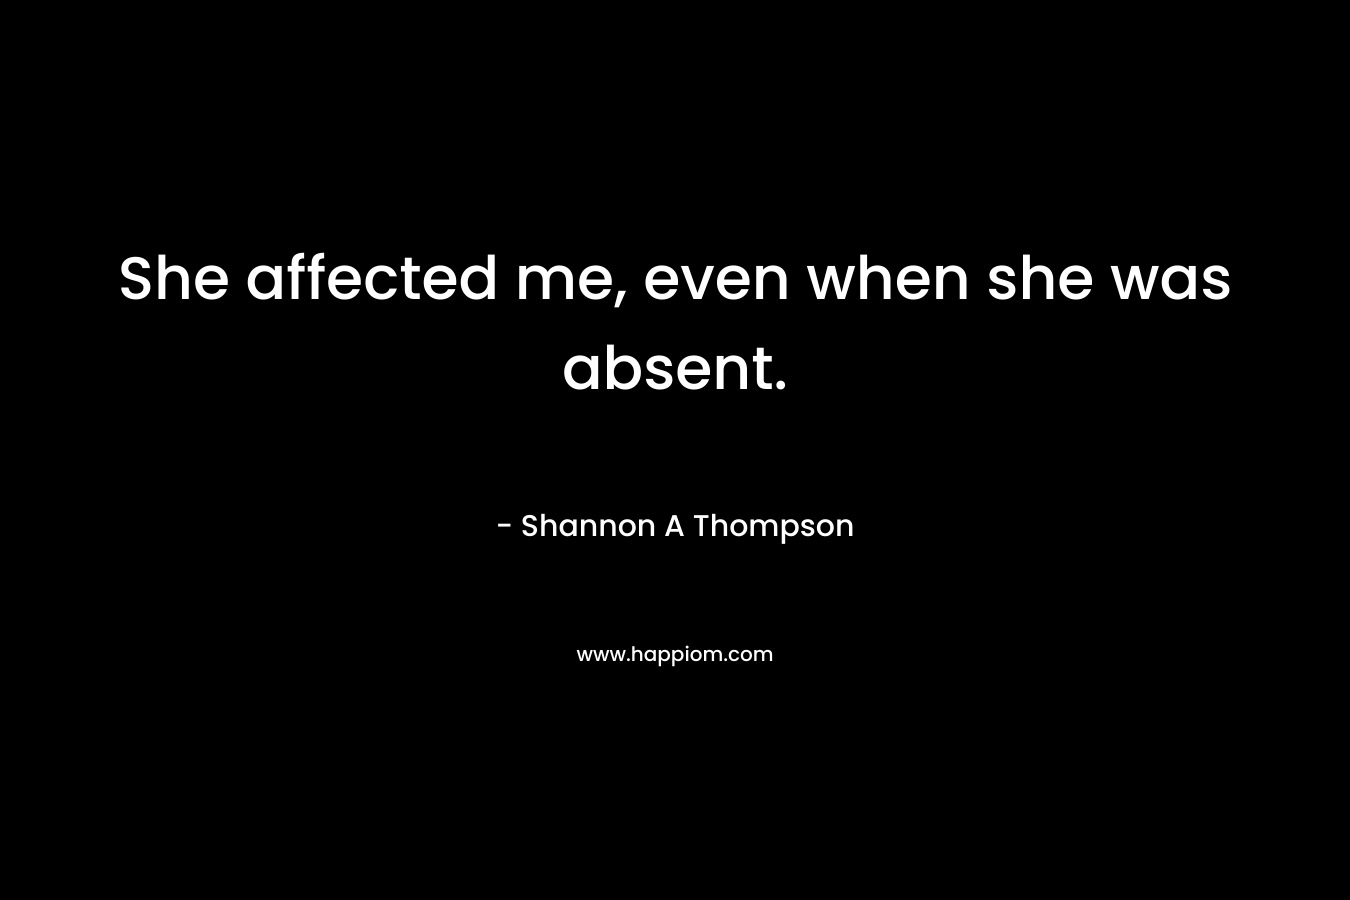 She affected me, even when she was absent.